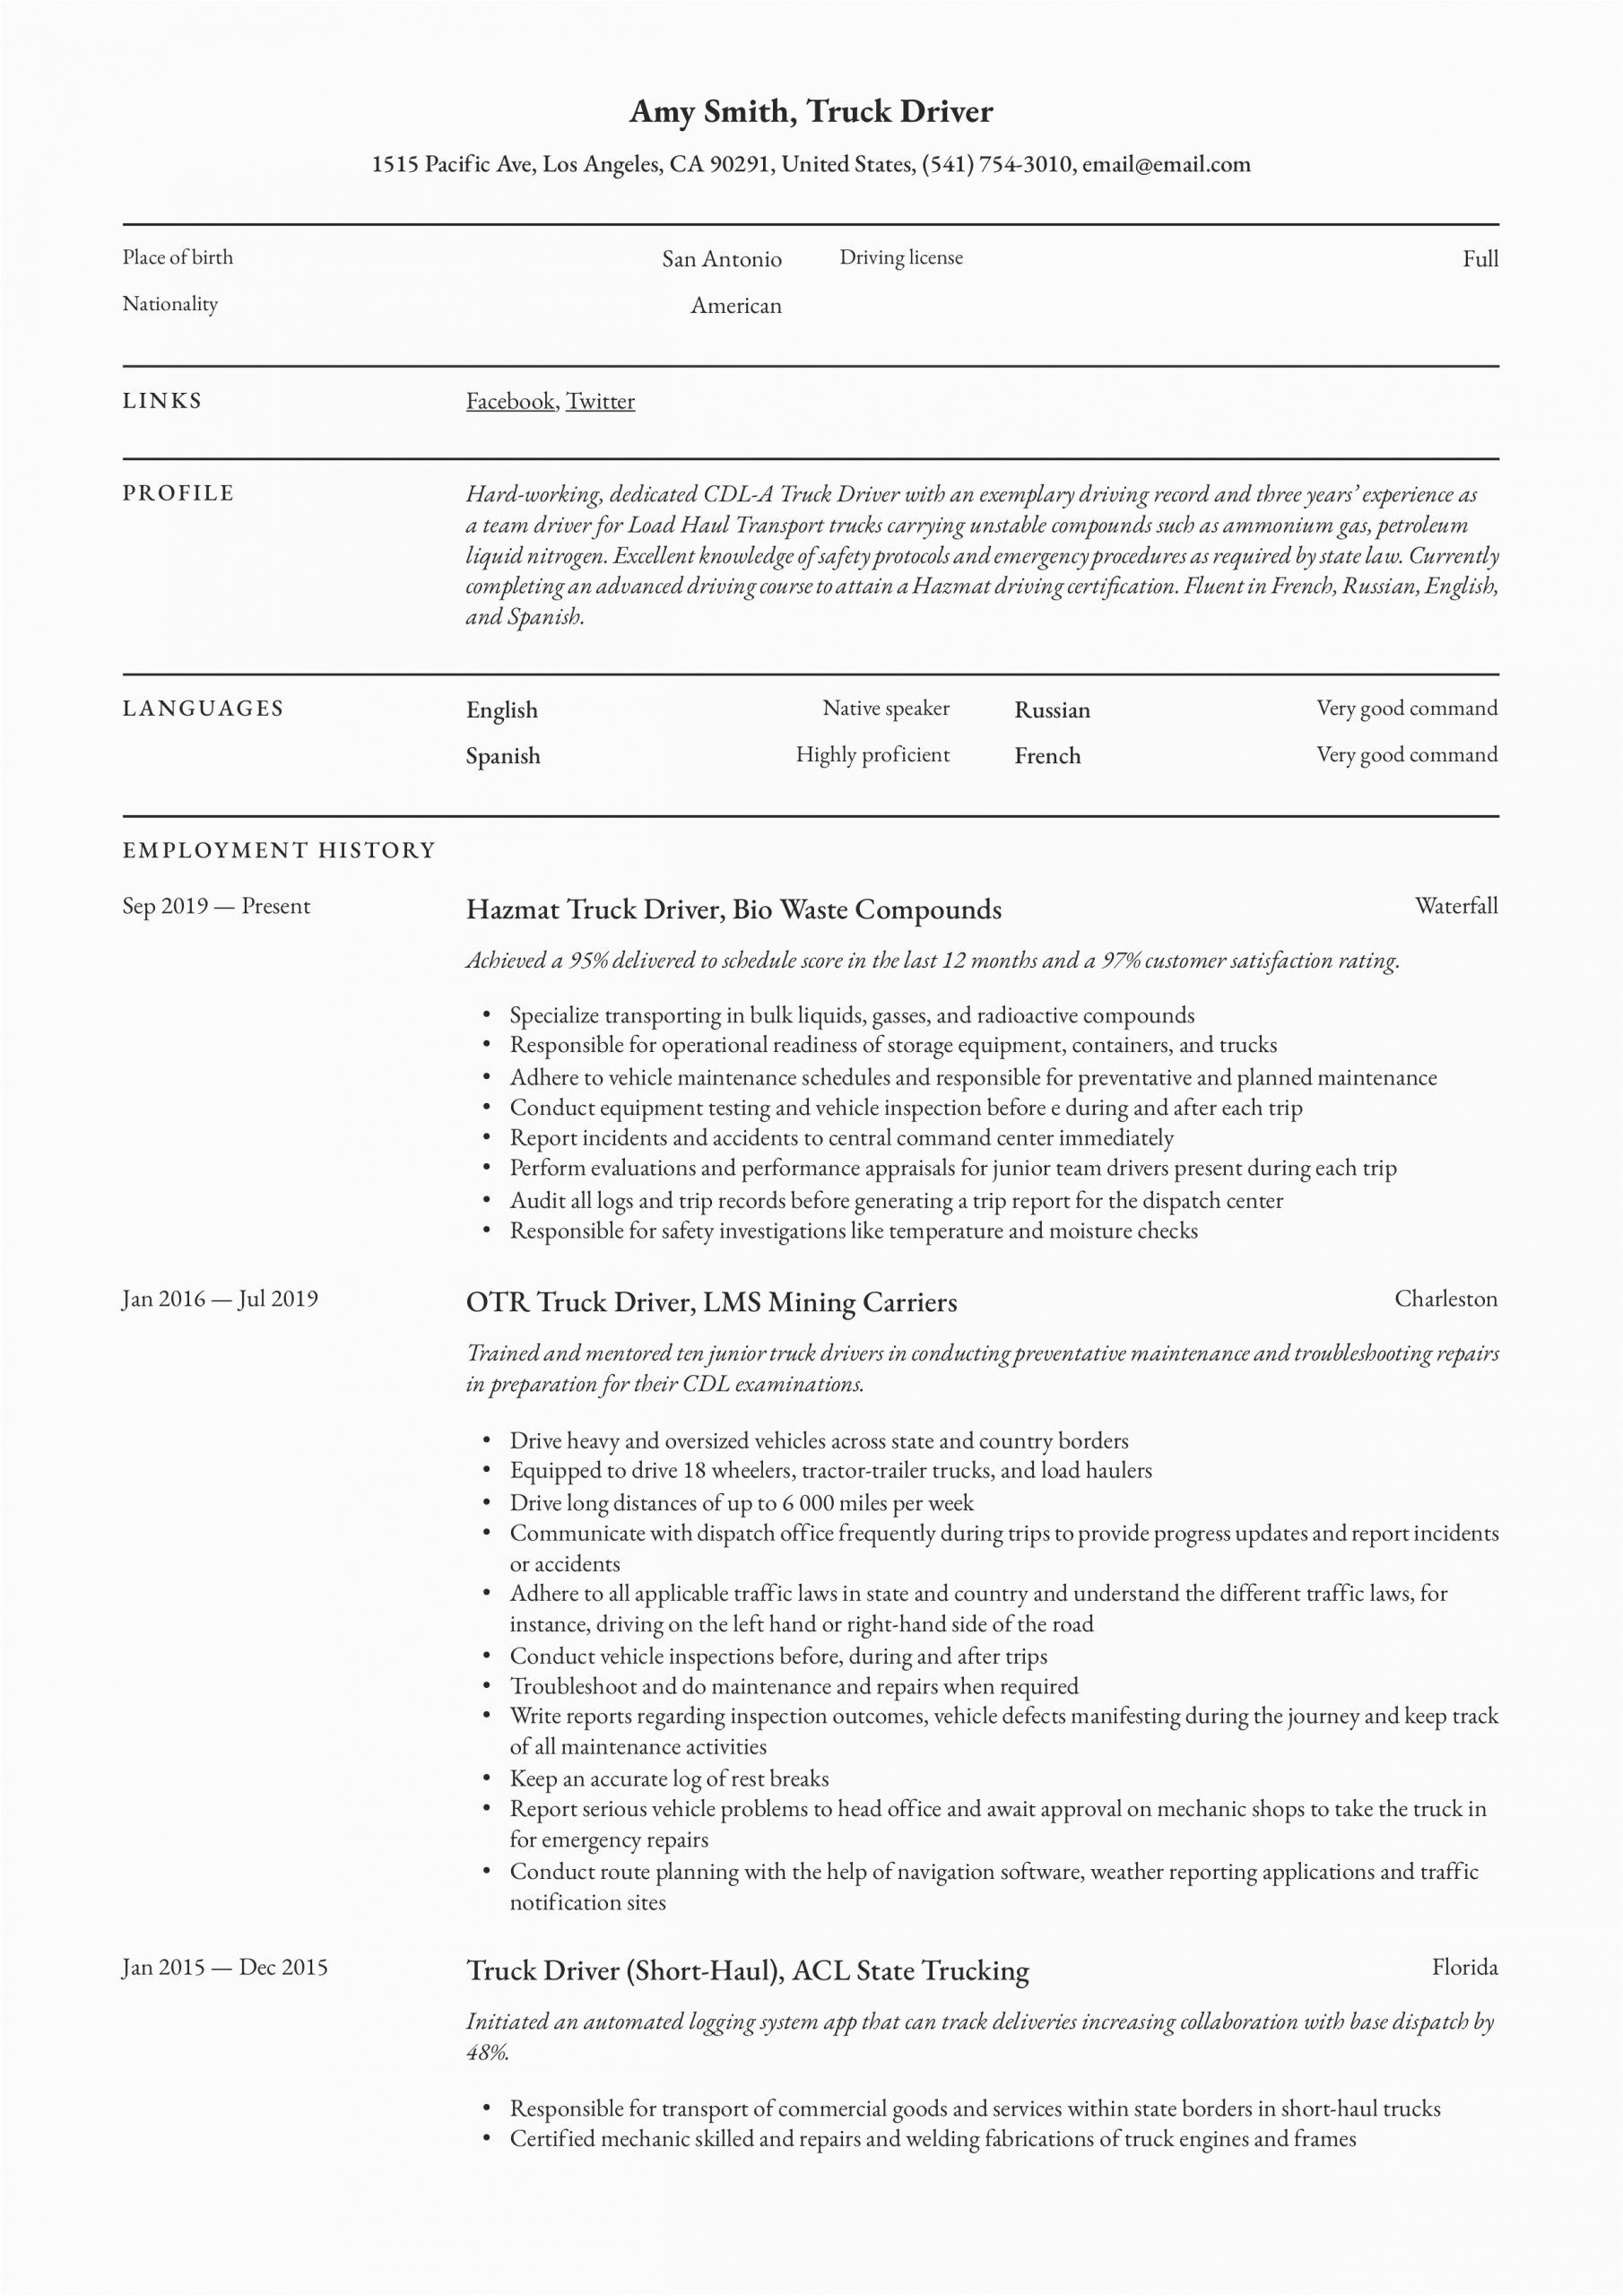 Sample Resume for Truck Driver Position Truck Driver Resume & Writing Guide